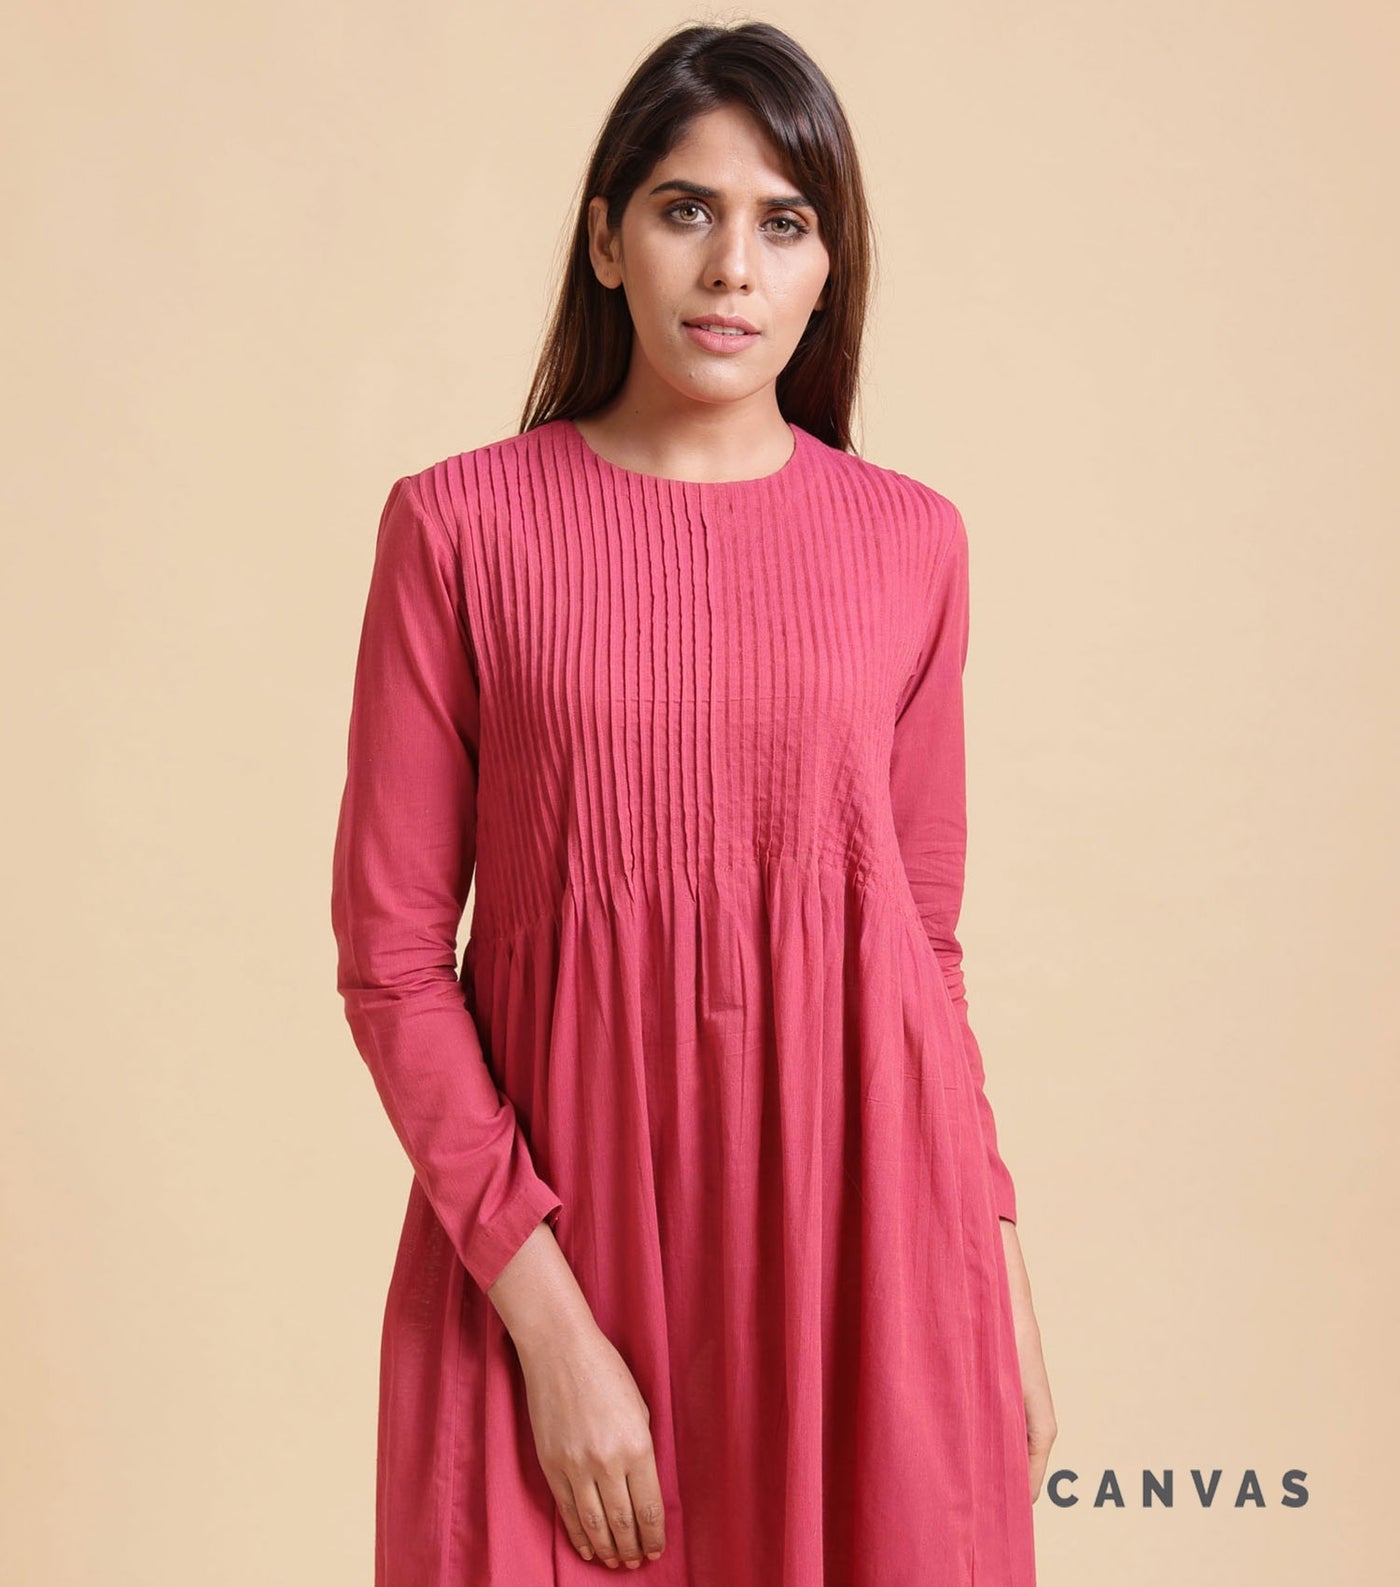 Pink pleated cotton dress